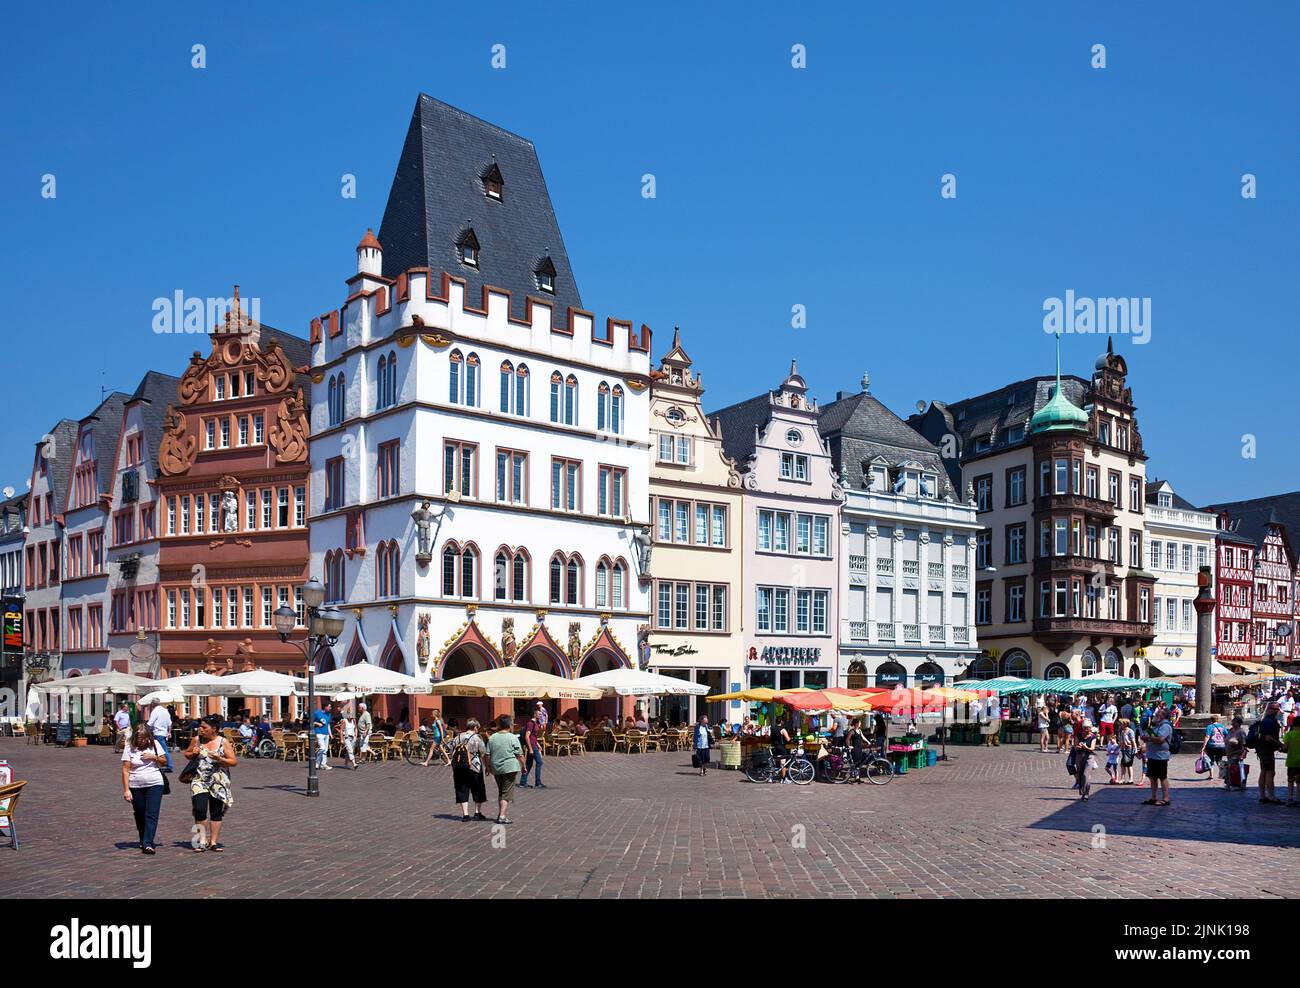 Main market with historical houses and street coffee shop, Ratskeller, Trier, Rhineland-Palatinate, Germany, Europe Stock Photo